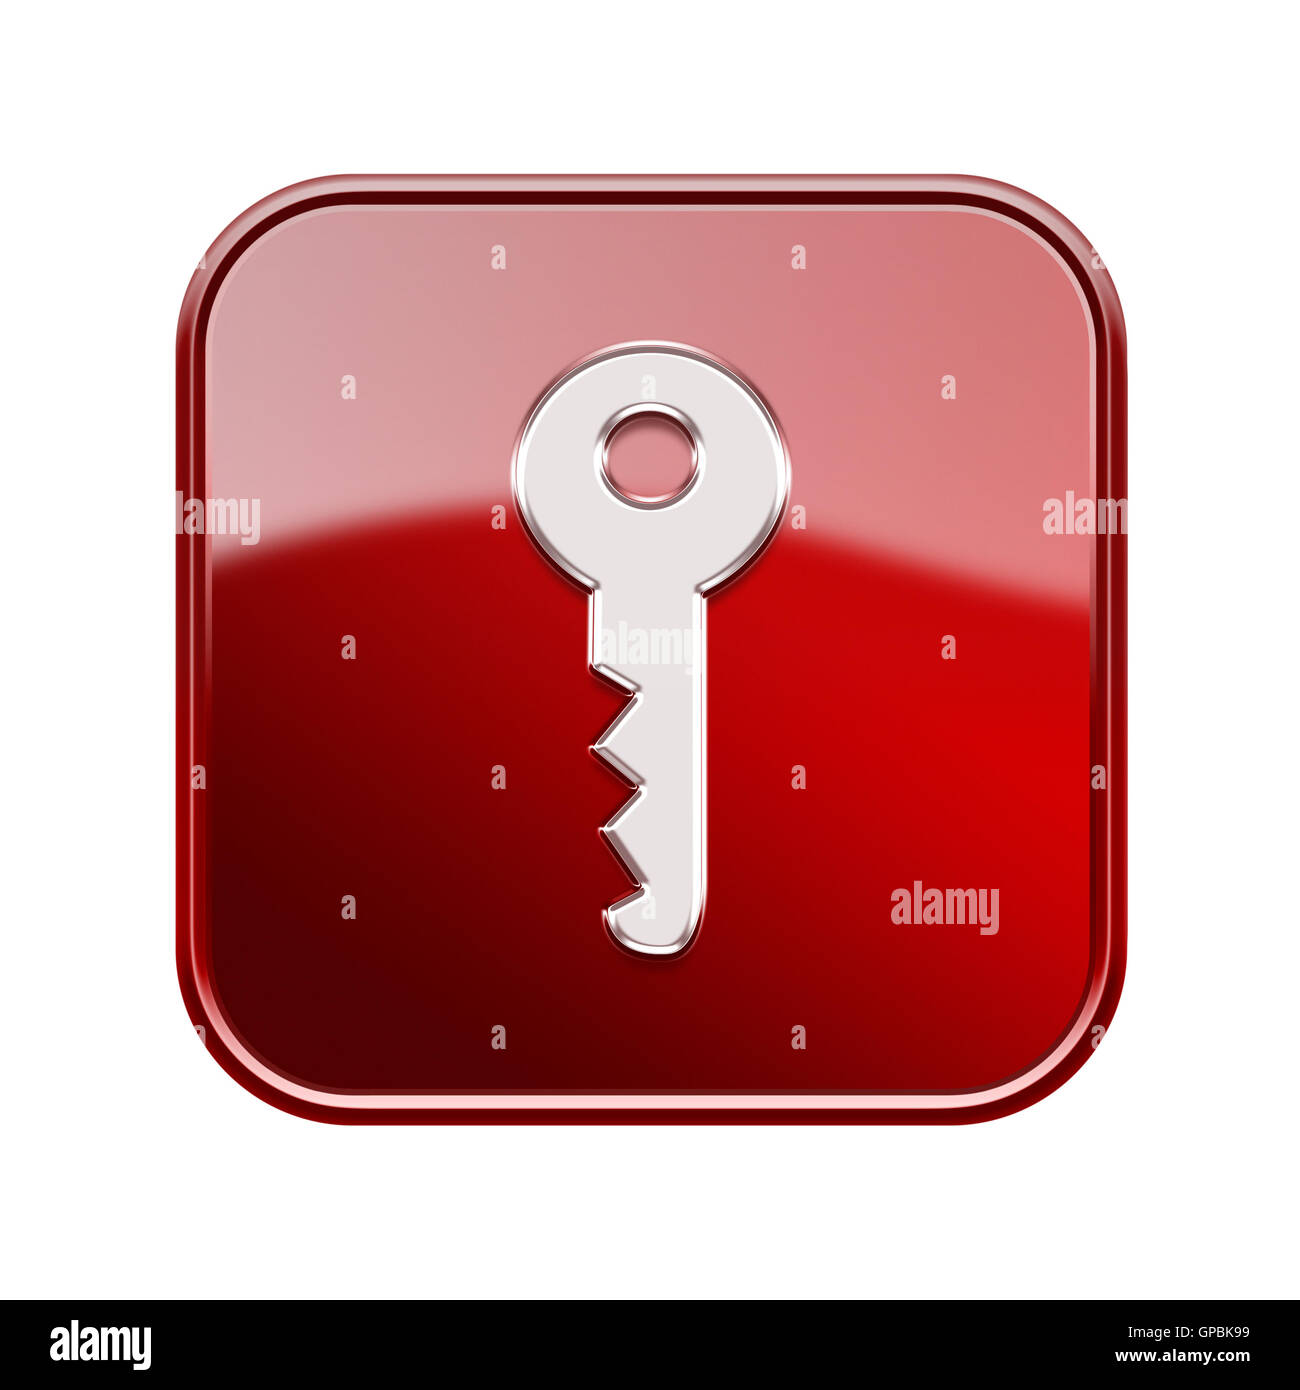 Key icon glossy red, isolated on white background Stock Photo